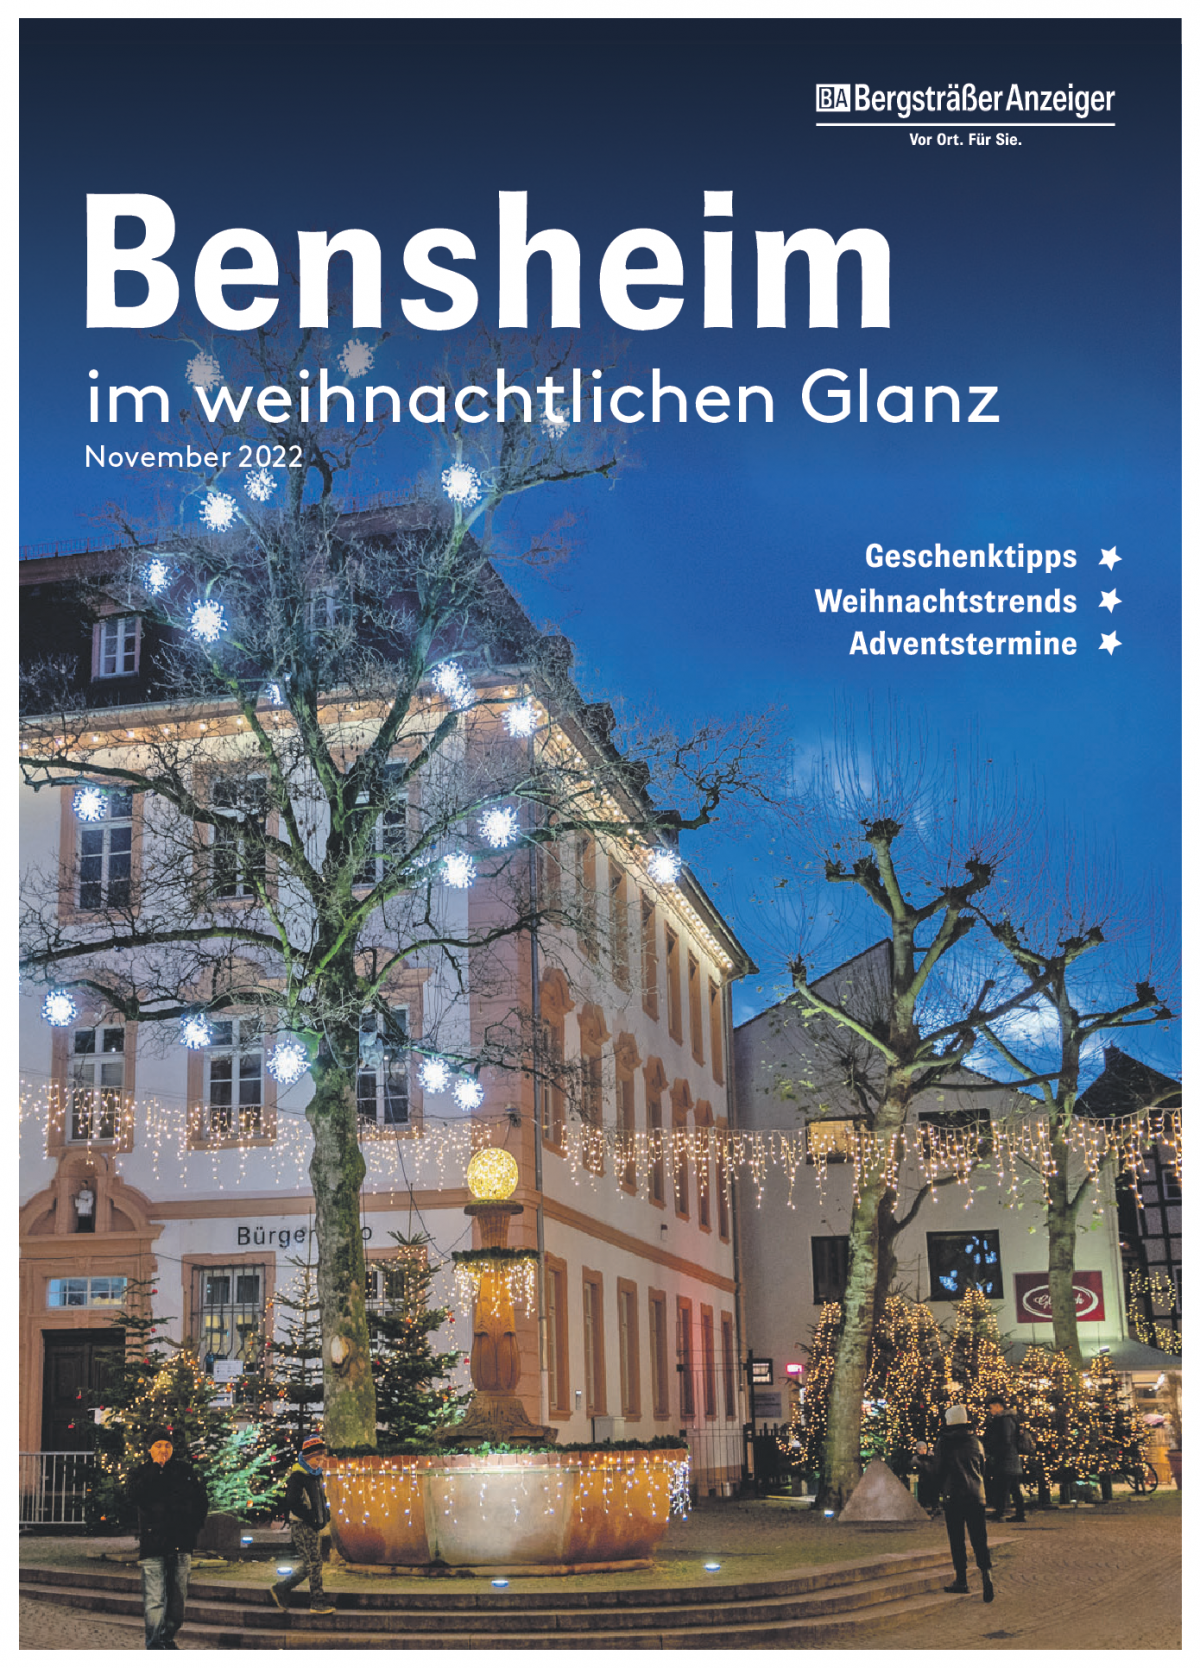 {"id":32089,"name":"Bensheim im weihnachtlichen Glanz","alias":"bensheim-im-weihnachtlichen-glanz-32089","description":null,"hubpage_title":null,"hubpage_image_id":2945661,"printheader_image_id":null,"logo_image_id":null,"created_at":"2022-11-23T19:18:55.000000Z","updated_at":"2022-11-23T19:35:36.000000Z","hubpage_image":{"id":2945661,"item_id":32089,"path":"storage\/images\/2022\/11\/23","name":"xwF6han6MqWKTDo73xwIBzuIKvlHL0AY.png","type":4,"created_at":"2022-11-23 20:35:36","settings":null,"cover_type":null}}